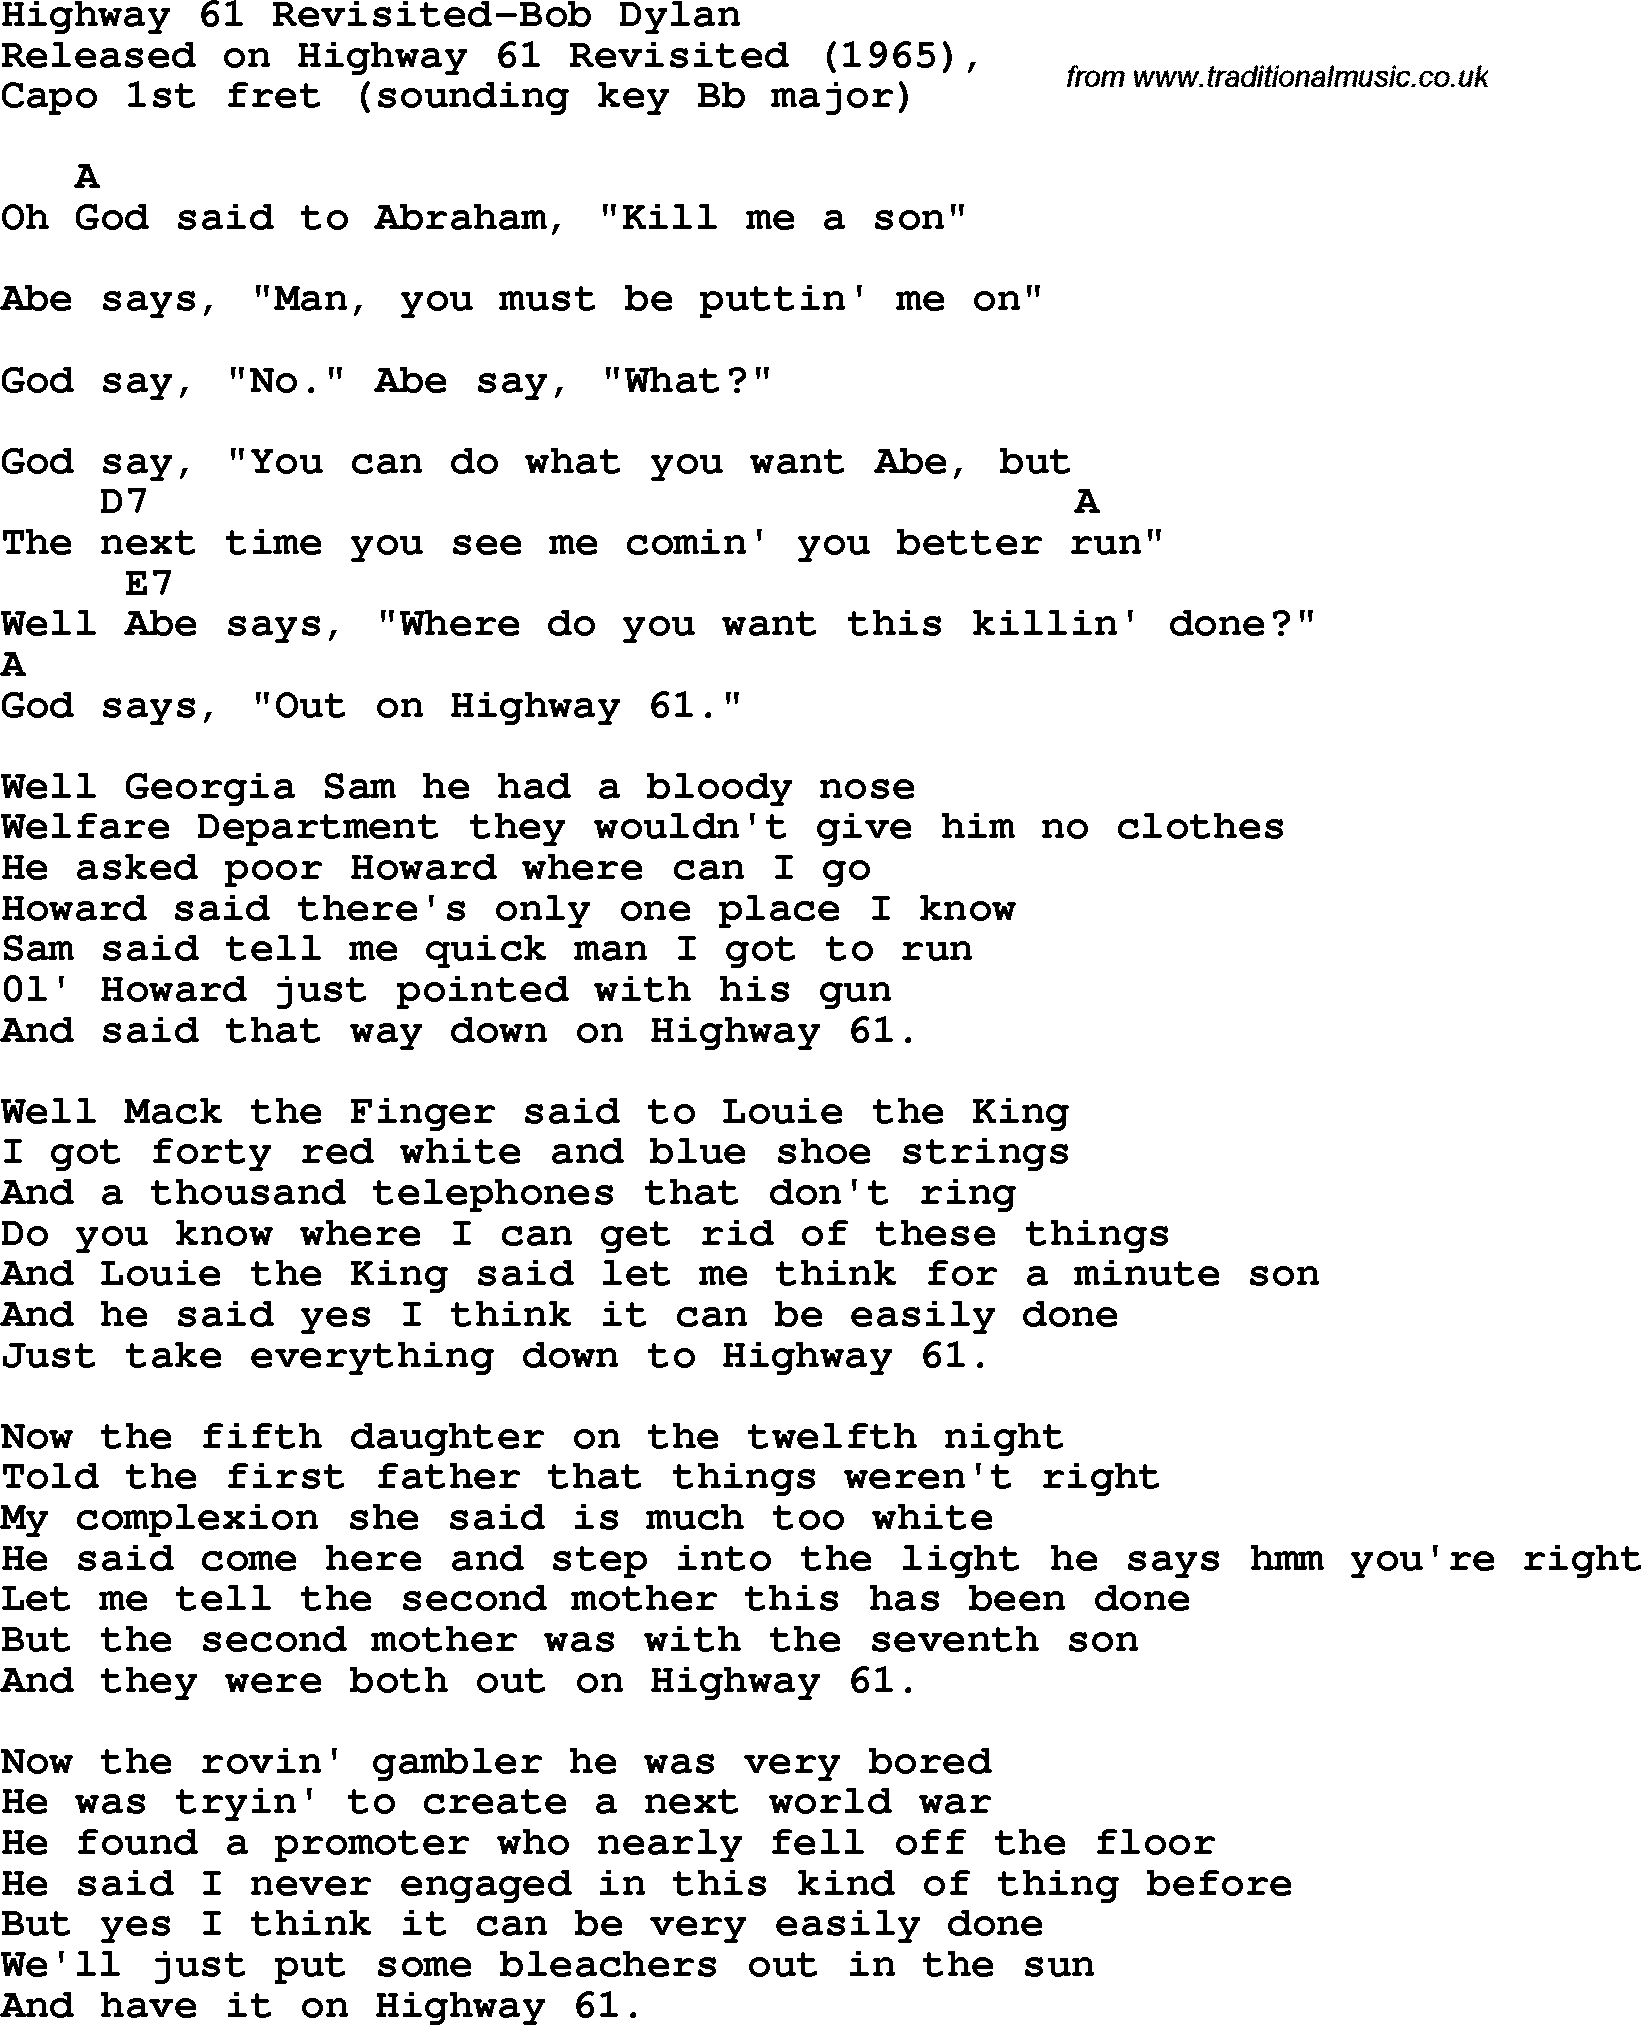 Protest Song Highway 61 Revisited-Bob Dylan lyrics and chords